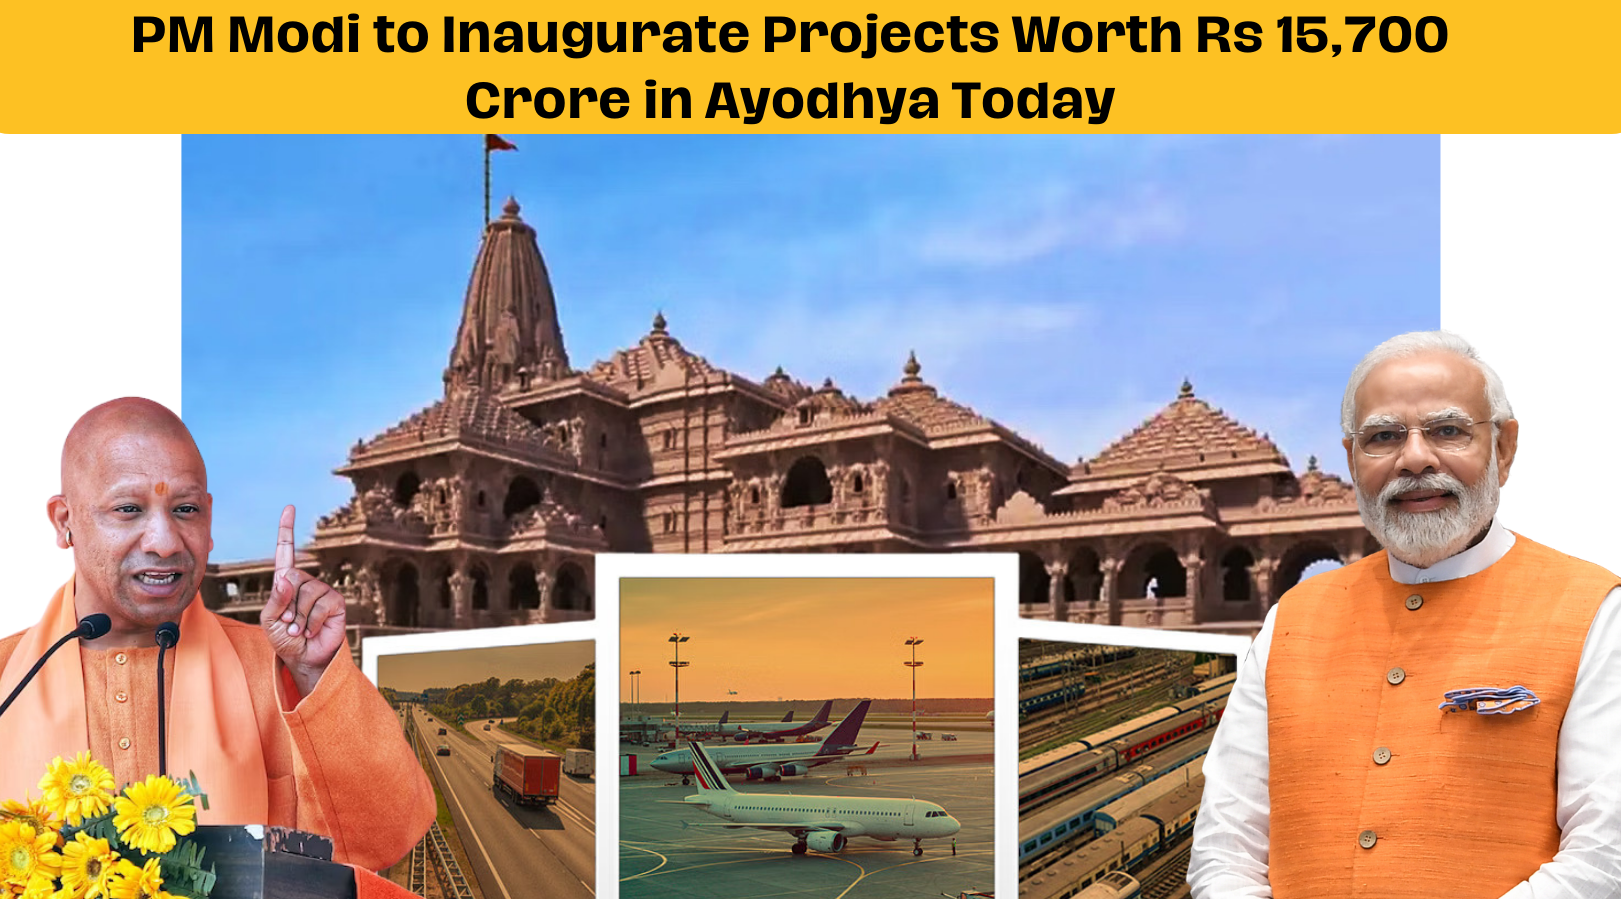 PM Modi to Inaugurate Projects Worth Rs 15,700 Crore in Ayodhya Today